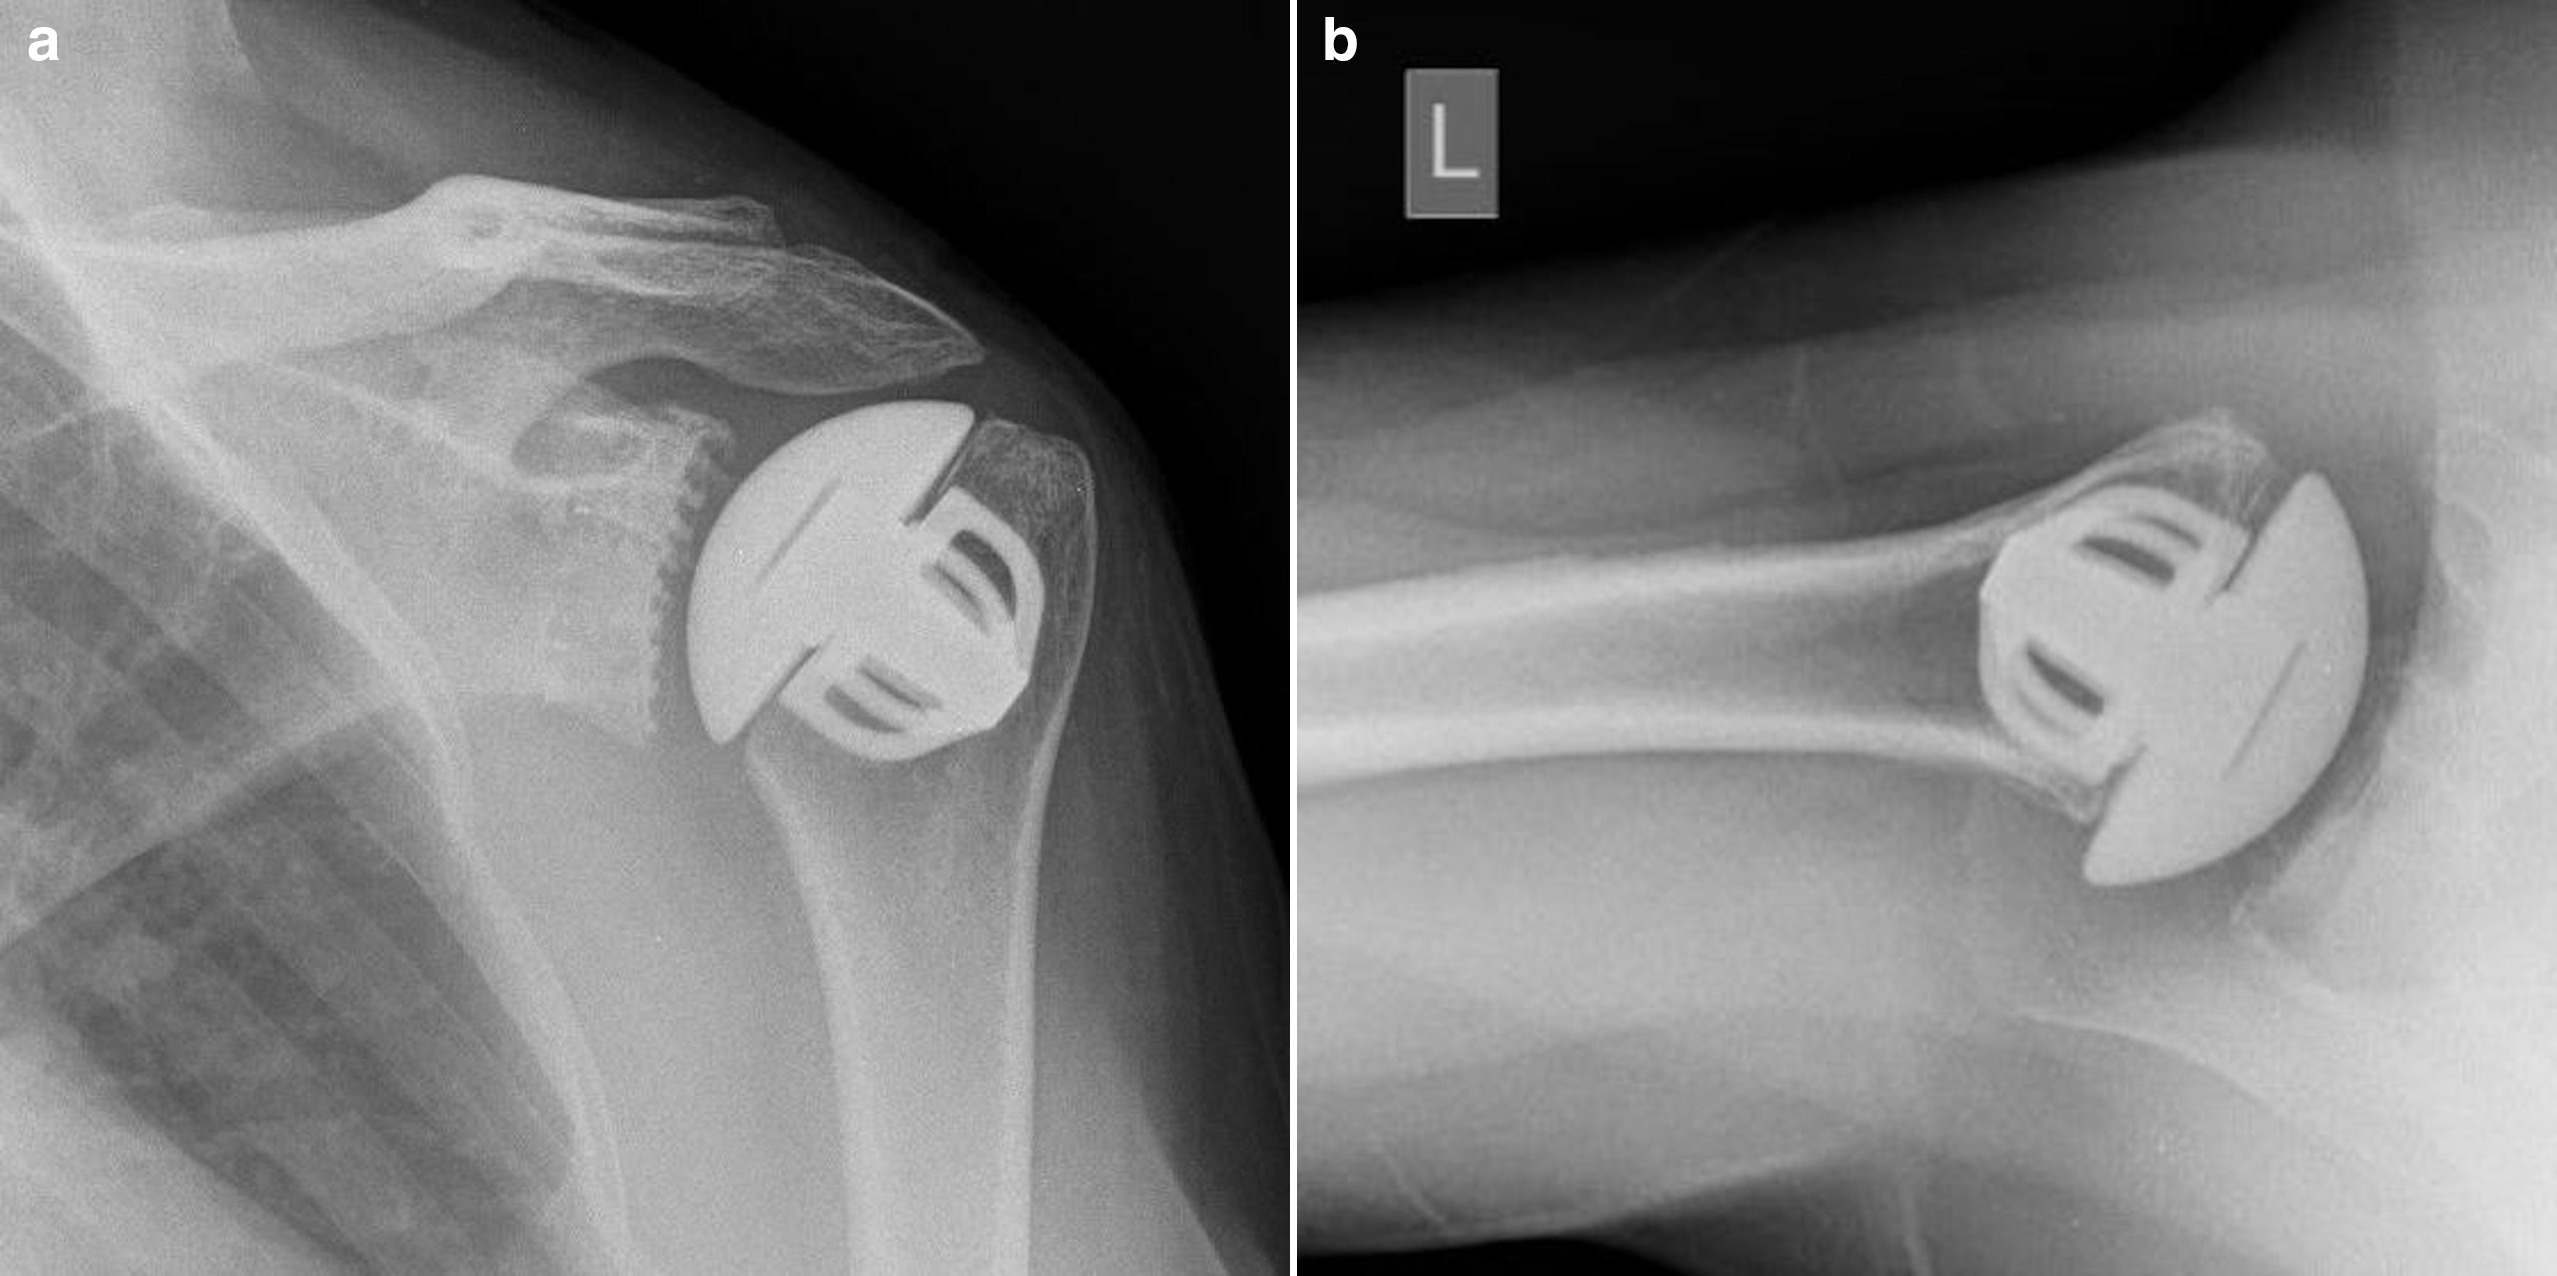 Fig. 2 
            a) Anteroposterior radiograph of the Affinis Short, Short Stem Total Shoulder Prosthesis and b) axillary radiograph of the Affinis Short, Short Stem Total Shoulder Prosthesis in a 72-year-old female patient.
          